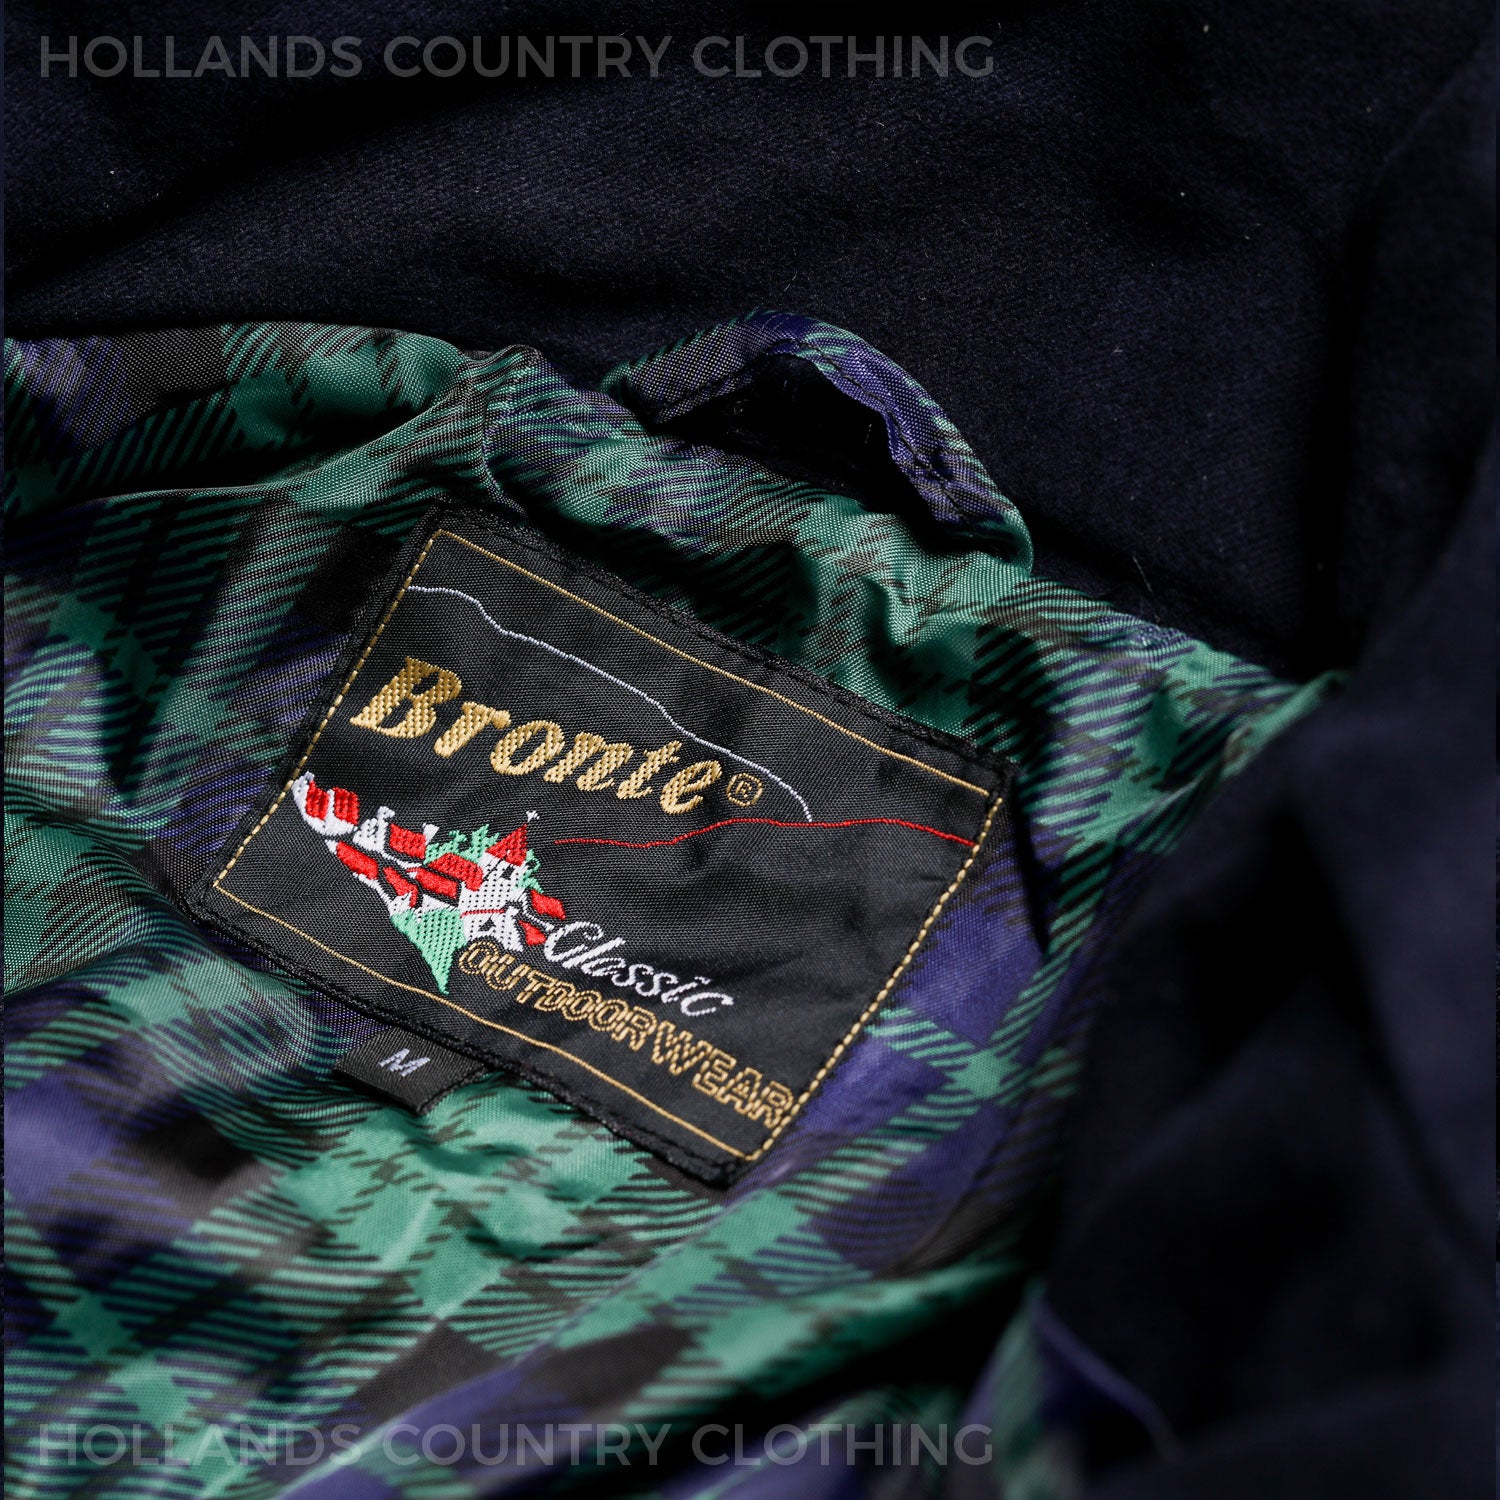 Bronte Country Clothing garment label british country clothing  